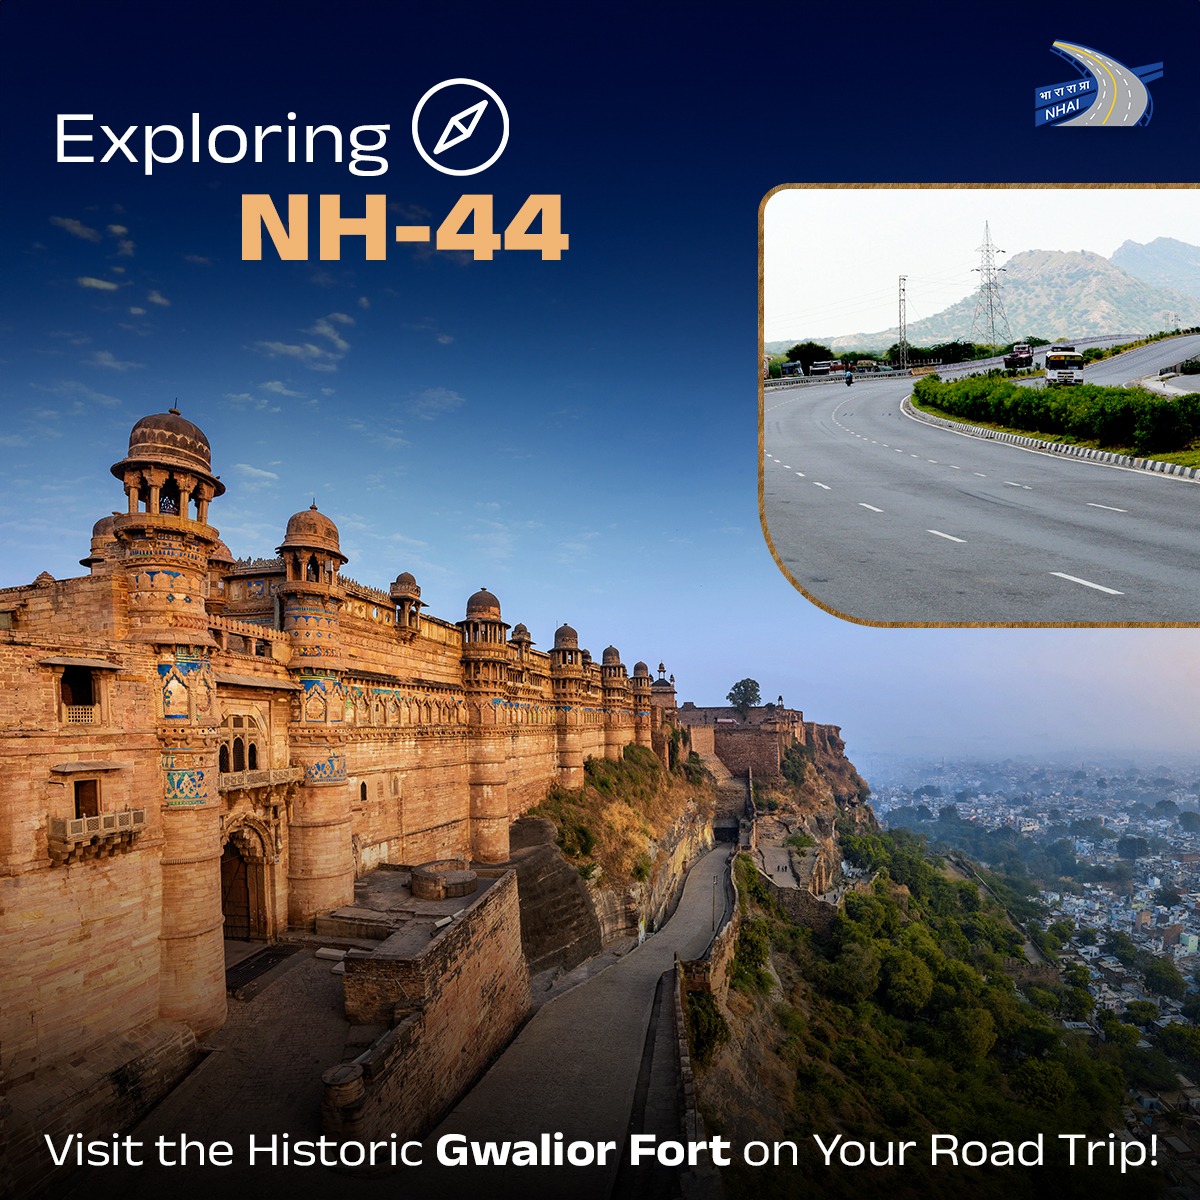 NH-44 passing through #Gwalior in #MadhyaPradesh provides easy access to the iconic Gwalior Fort, known for its architecture, history, and strategic location. Share with us any other iconic structure you have explored next to an NH in the comments section below. #NHAI